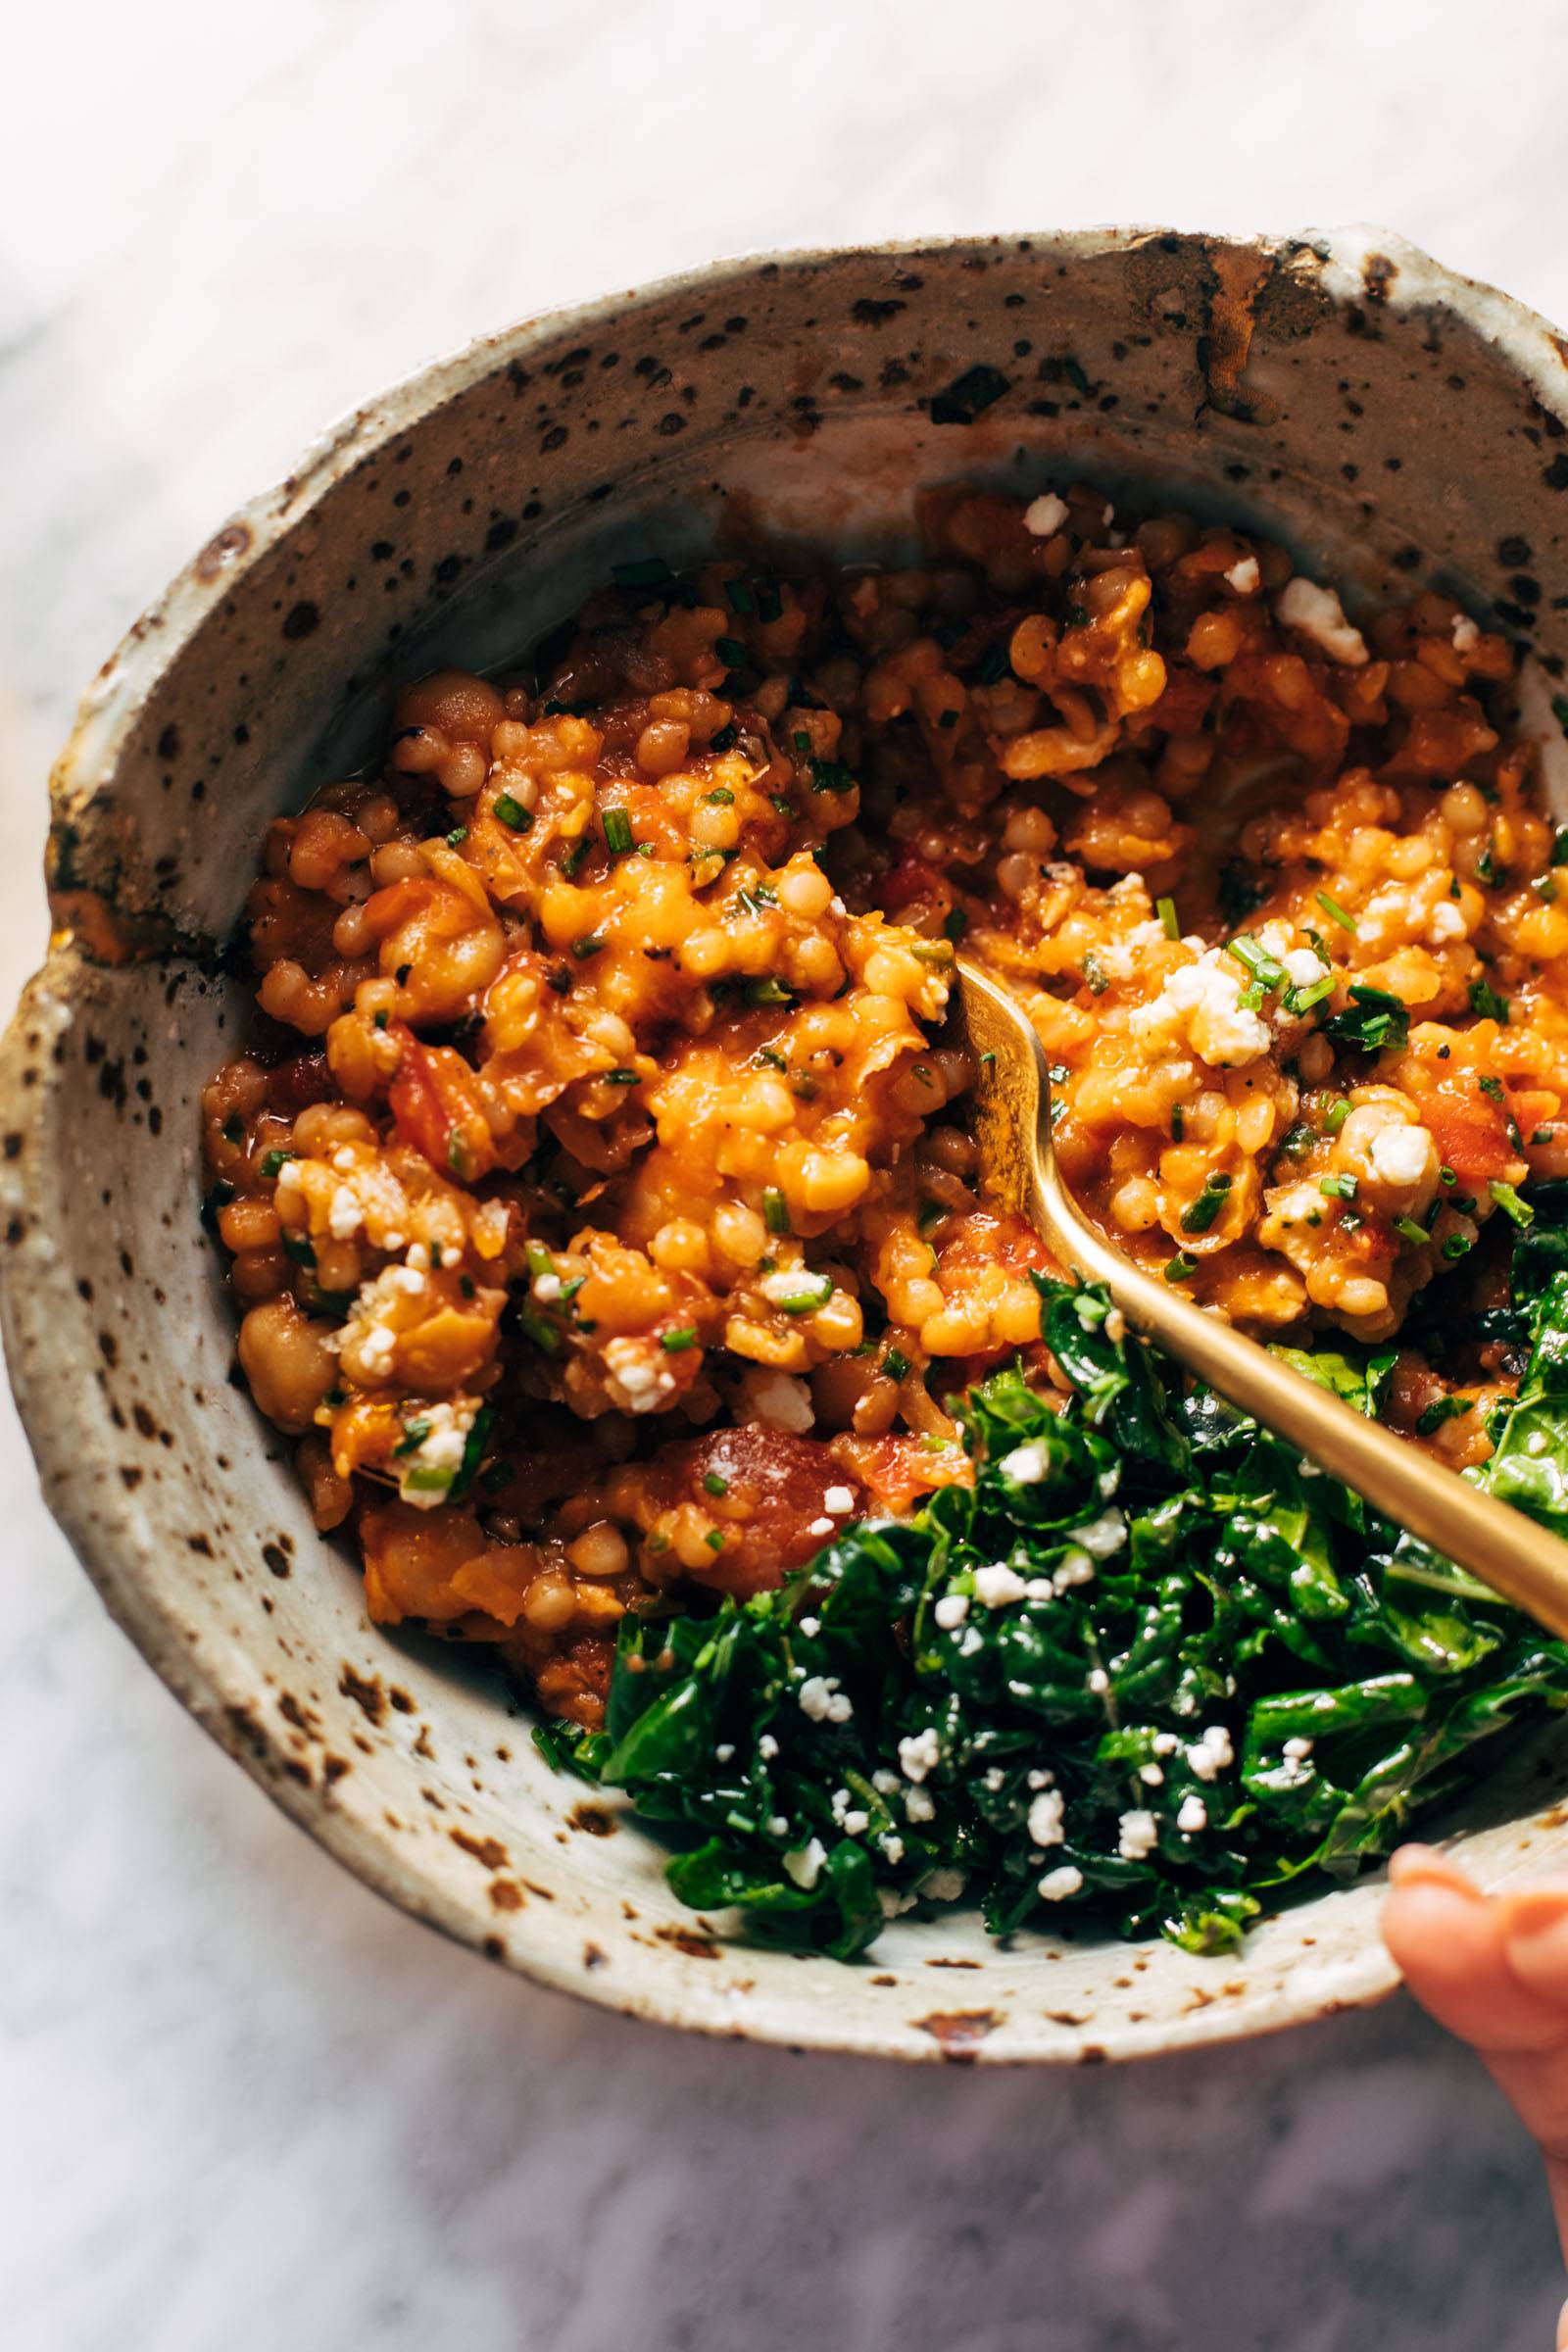 Couscous and tomatoes in a bowl with a spoon and kale.